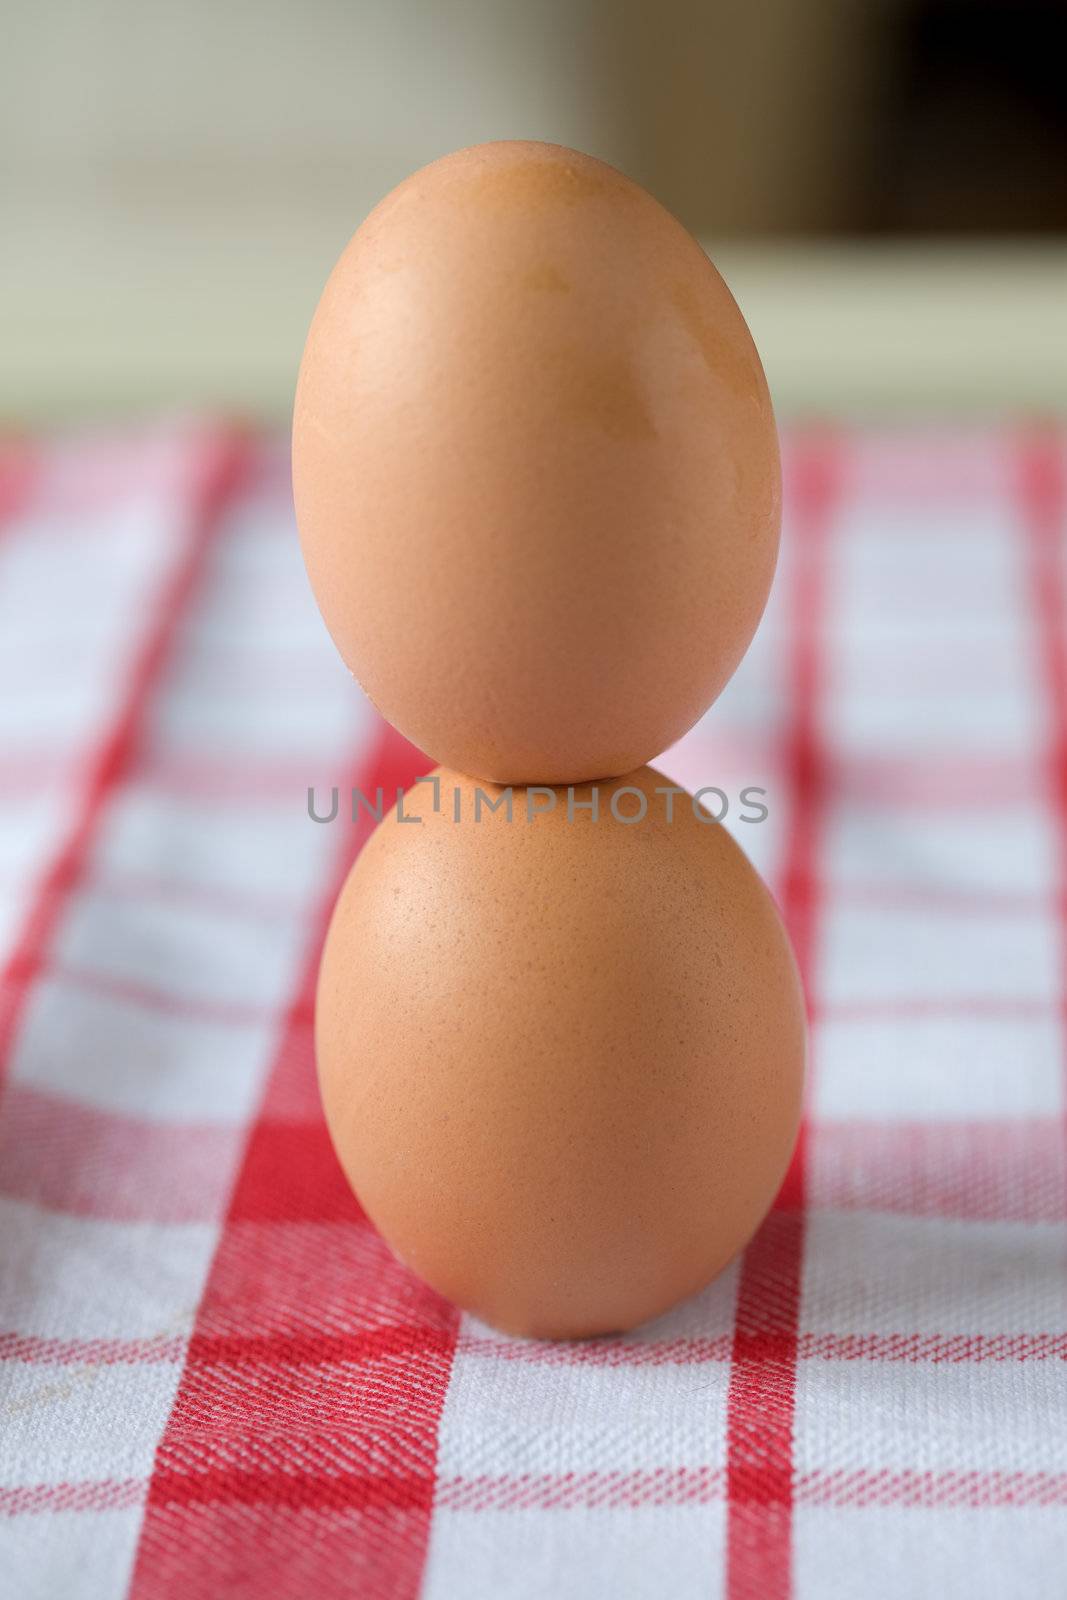 Two eggs standing on top of each other